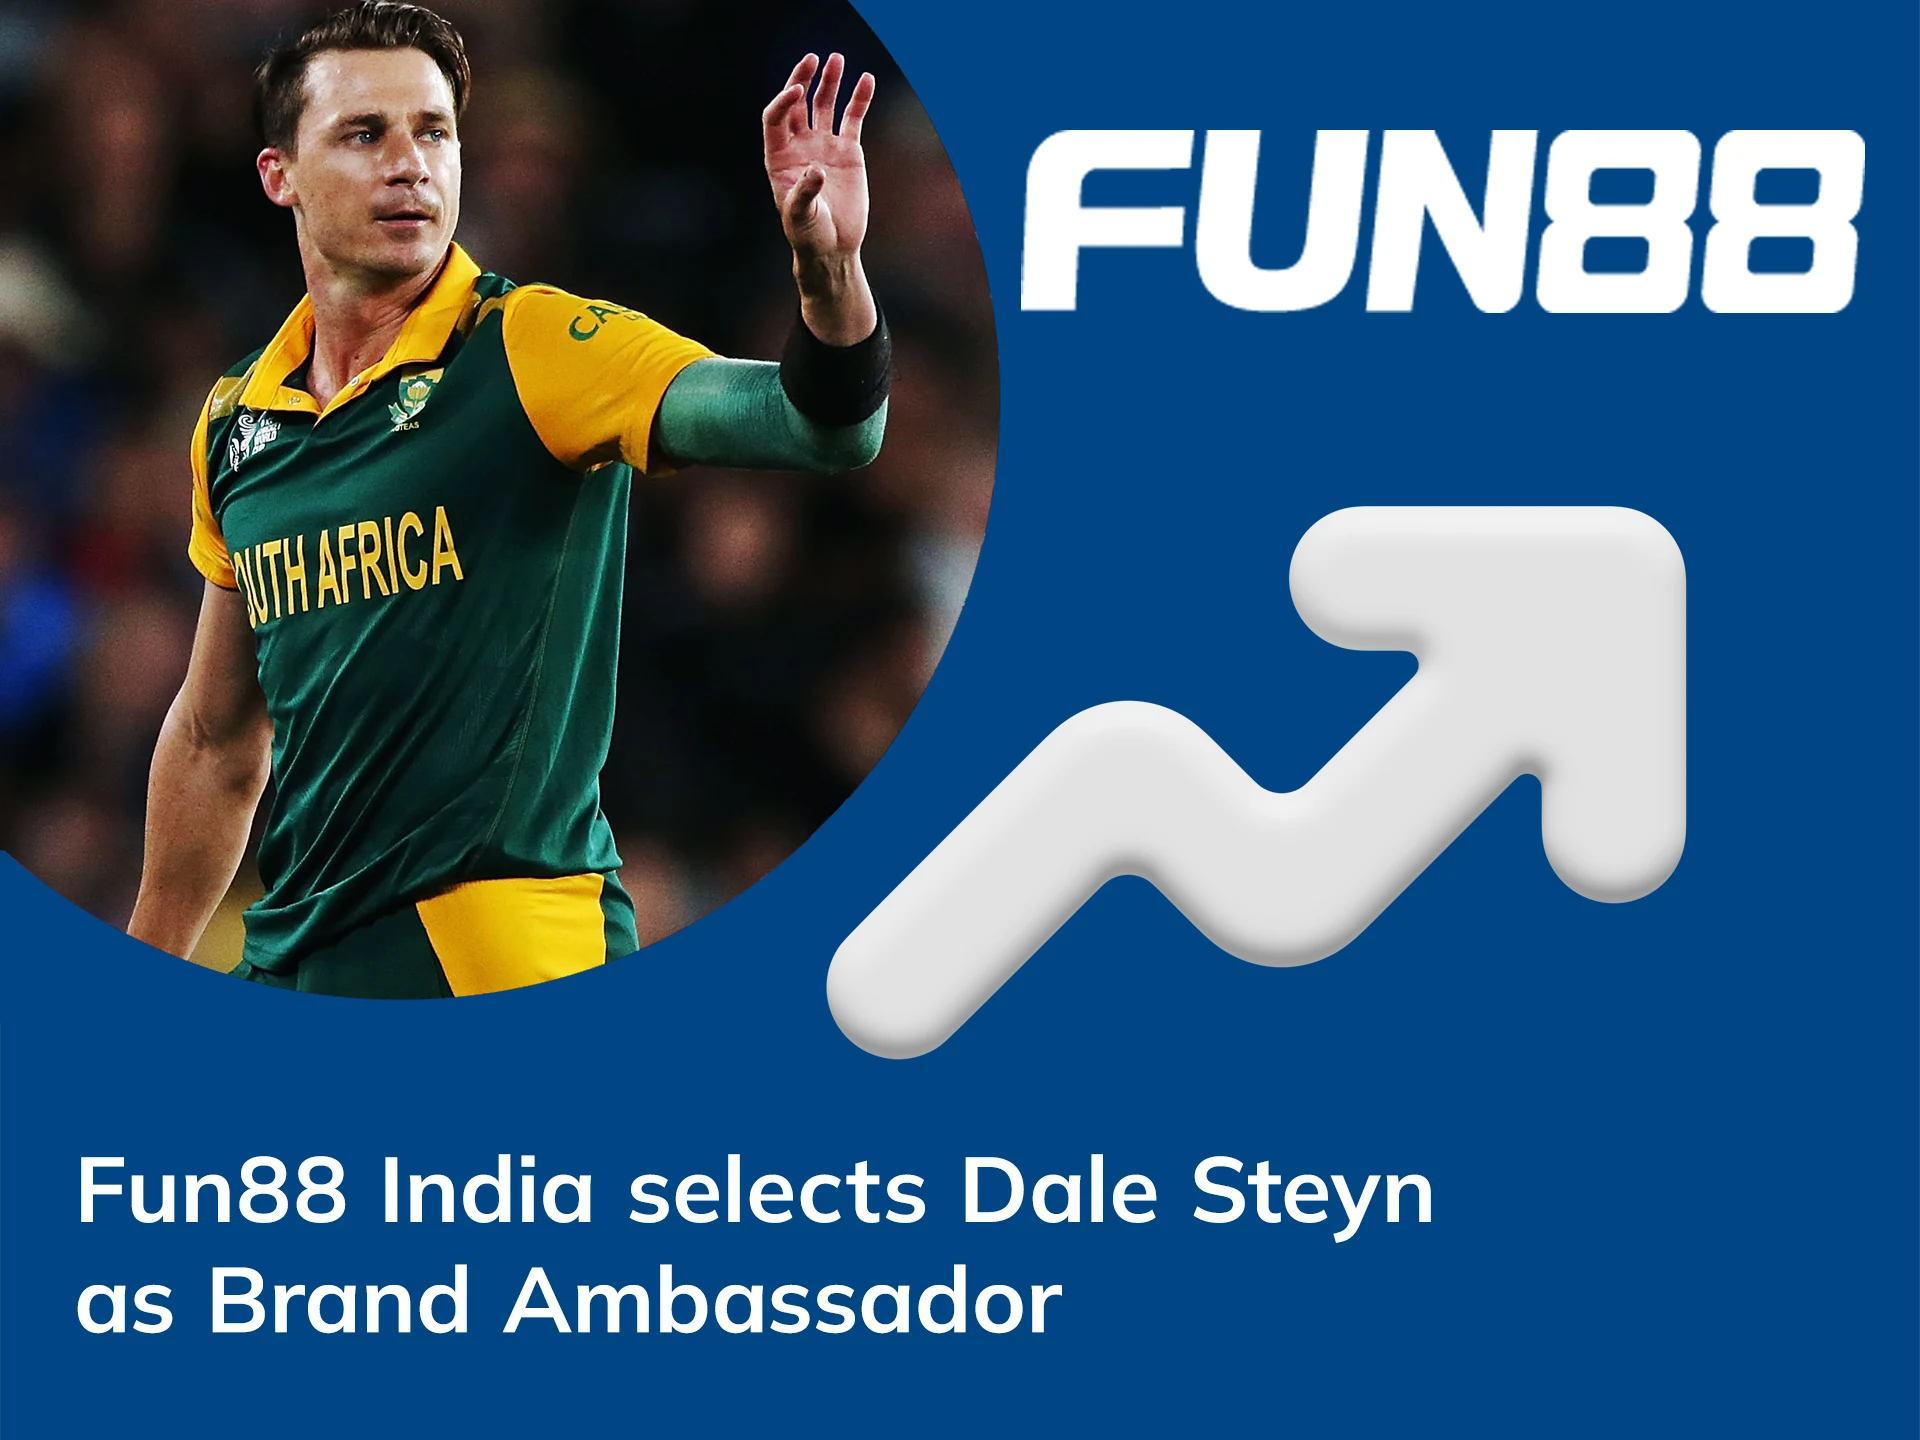 Fun88 has announced its partnership with famous cricket player Dale Steyn and appointed him as the new brand ambassador.